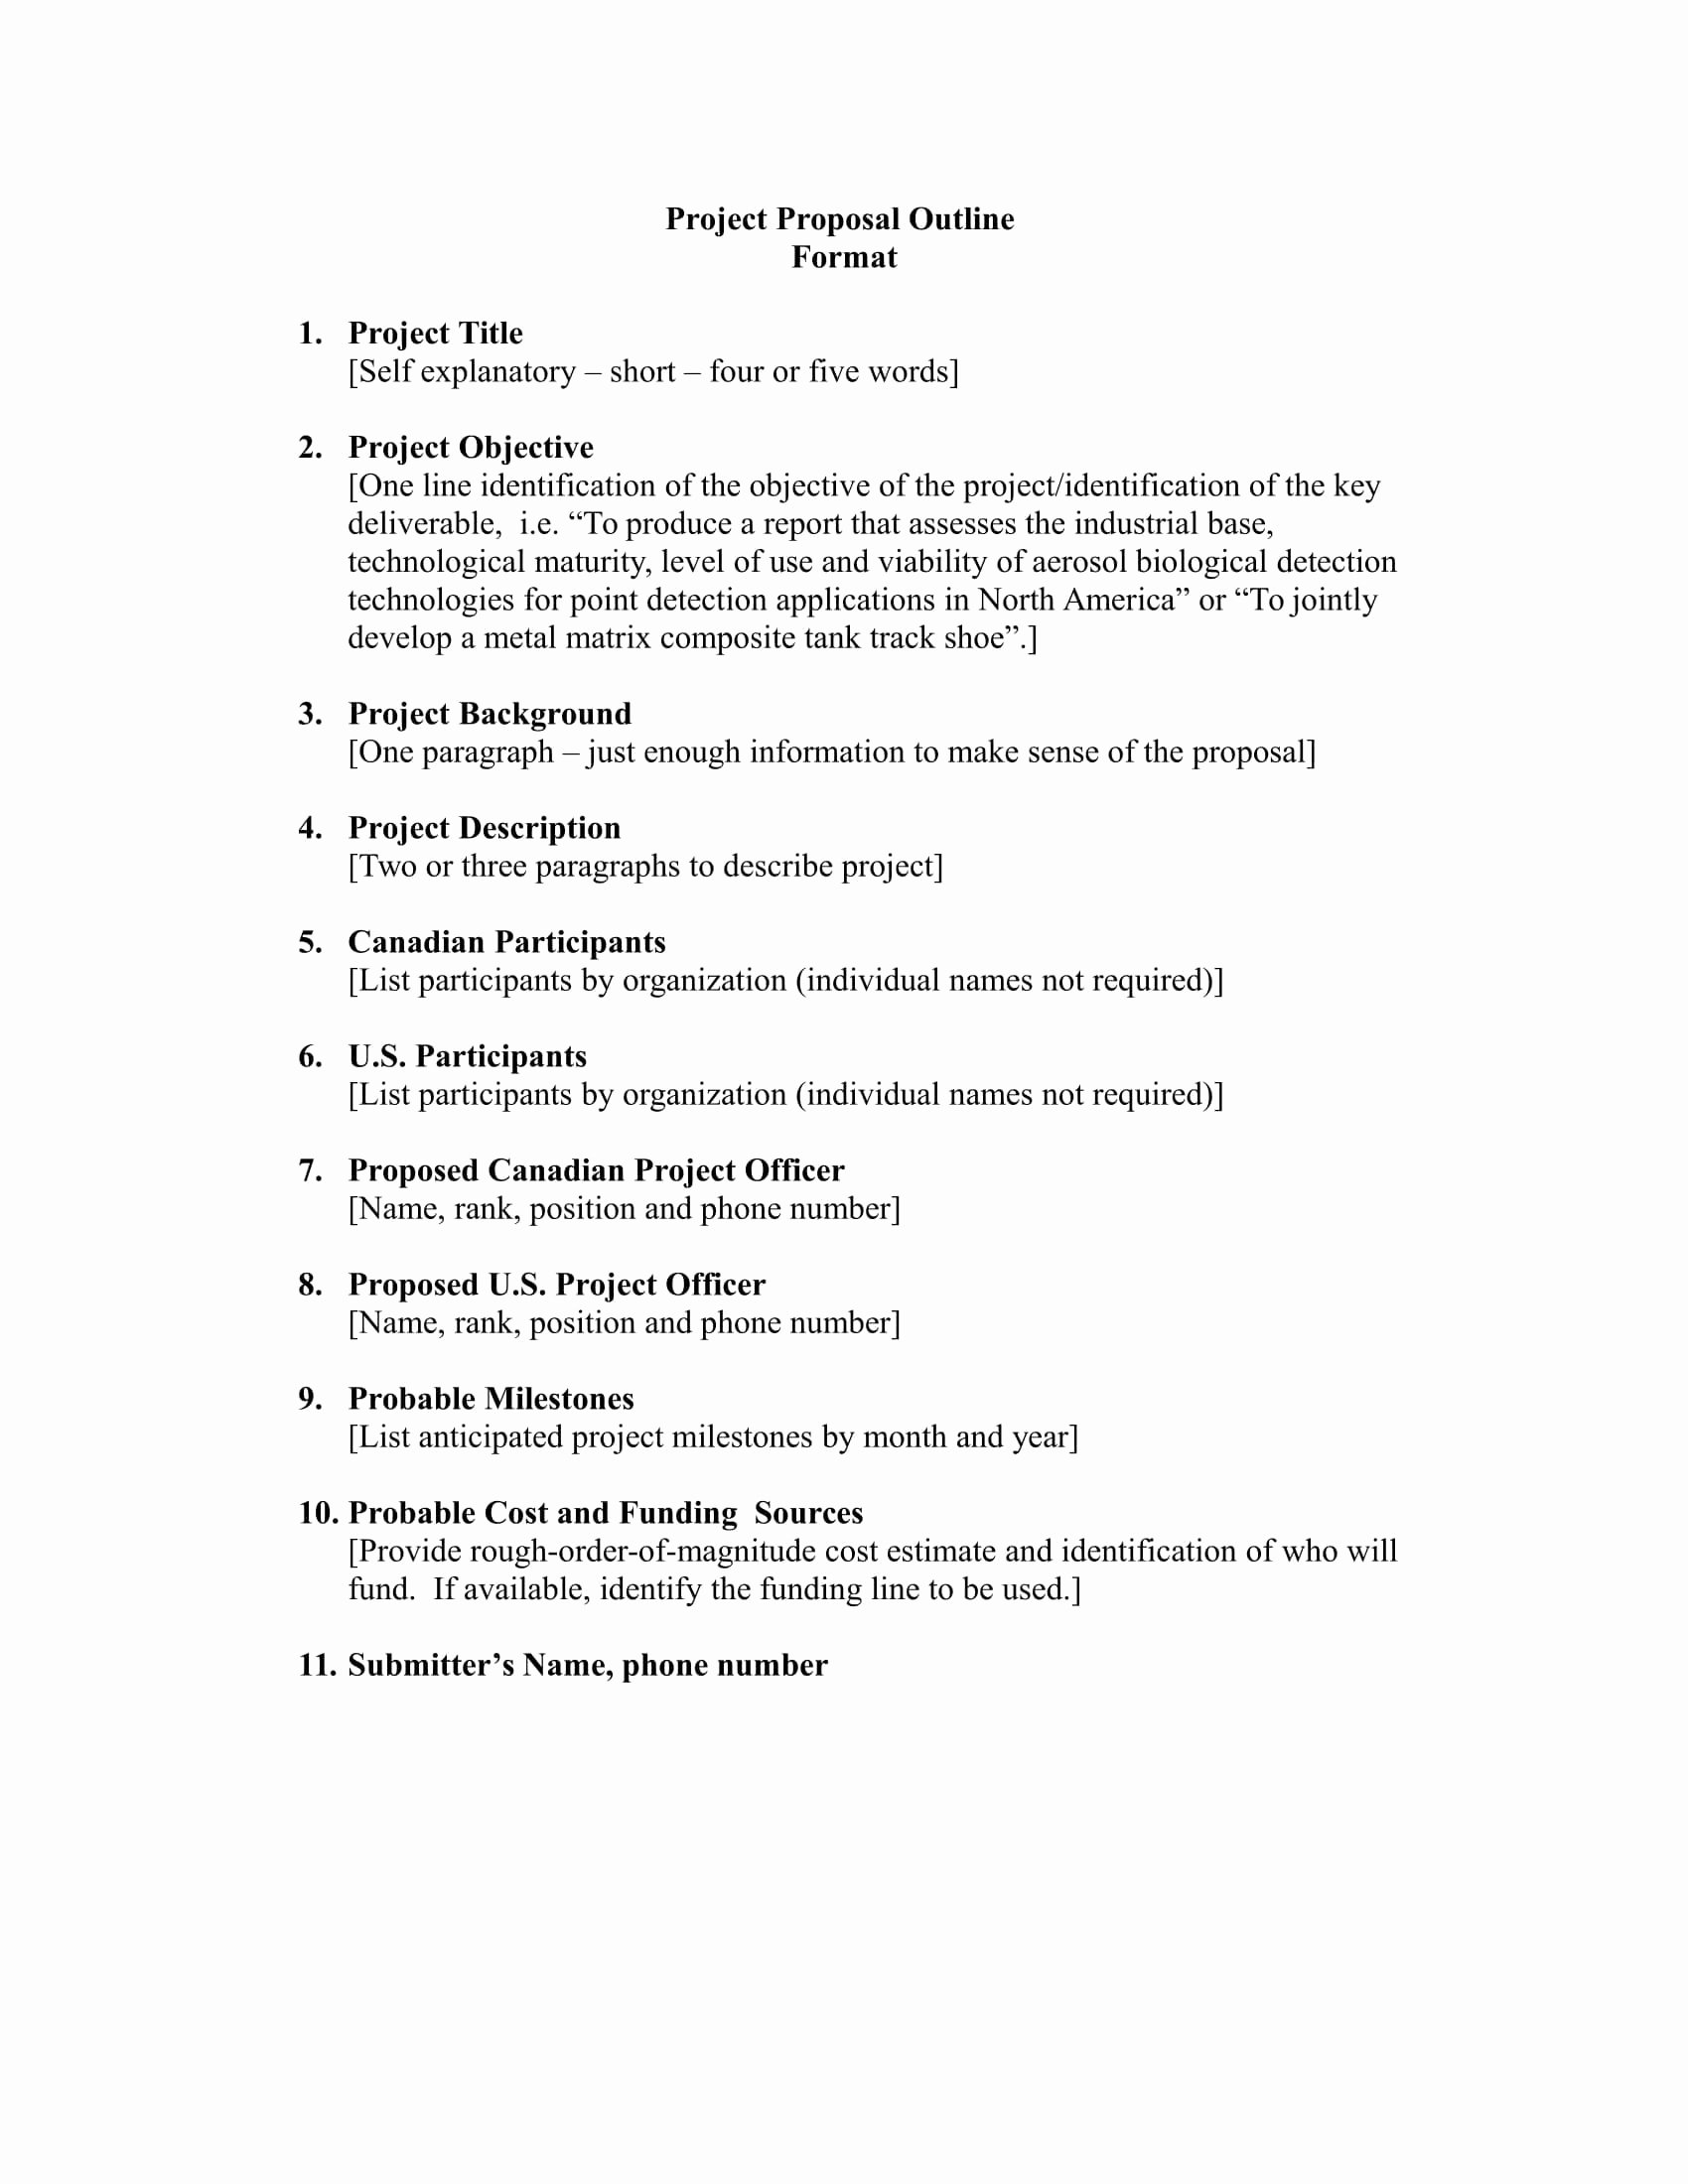 Project Proposal Outline Sample Awesome 4 Project Proposal Outline Examples Pdf Word Pages